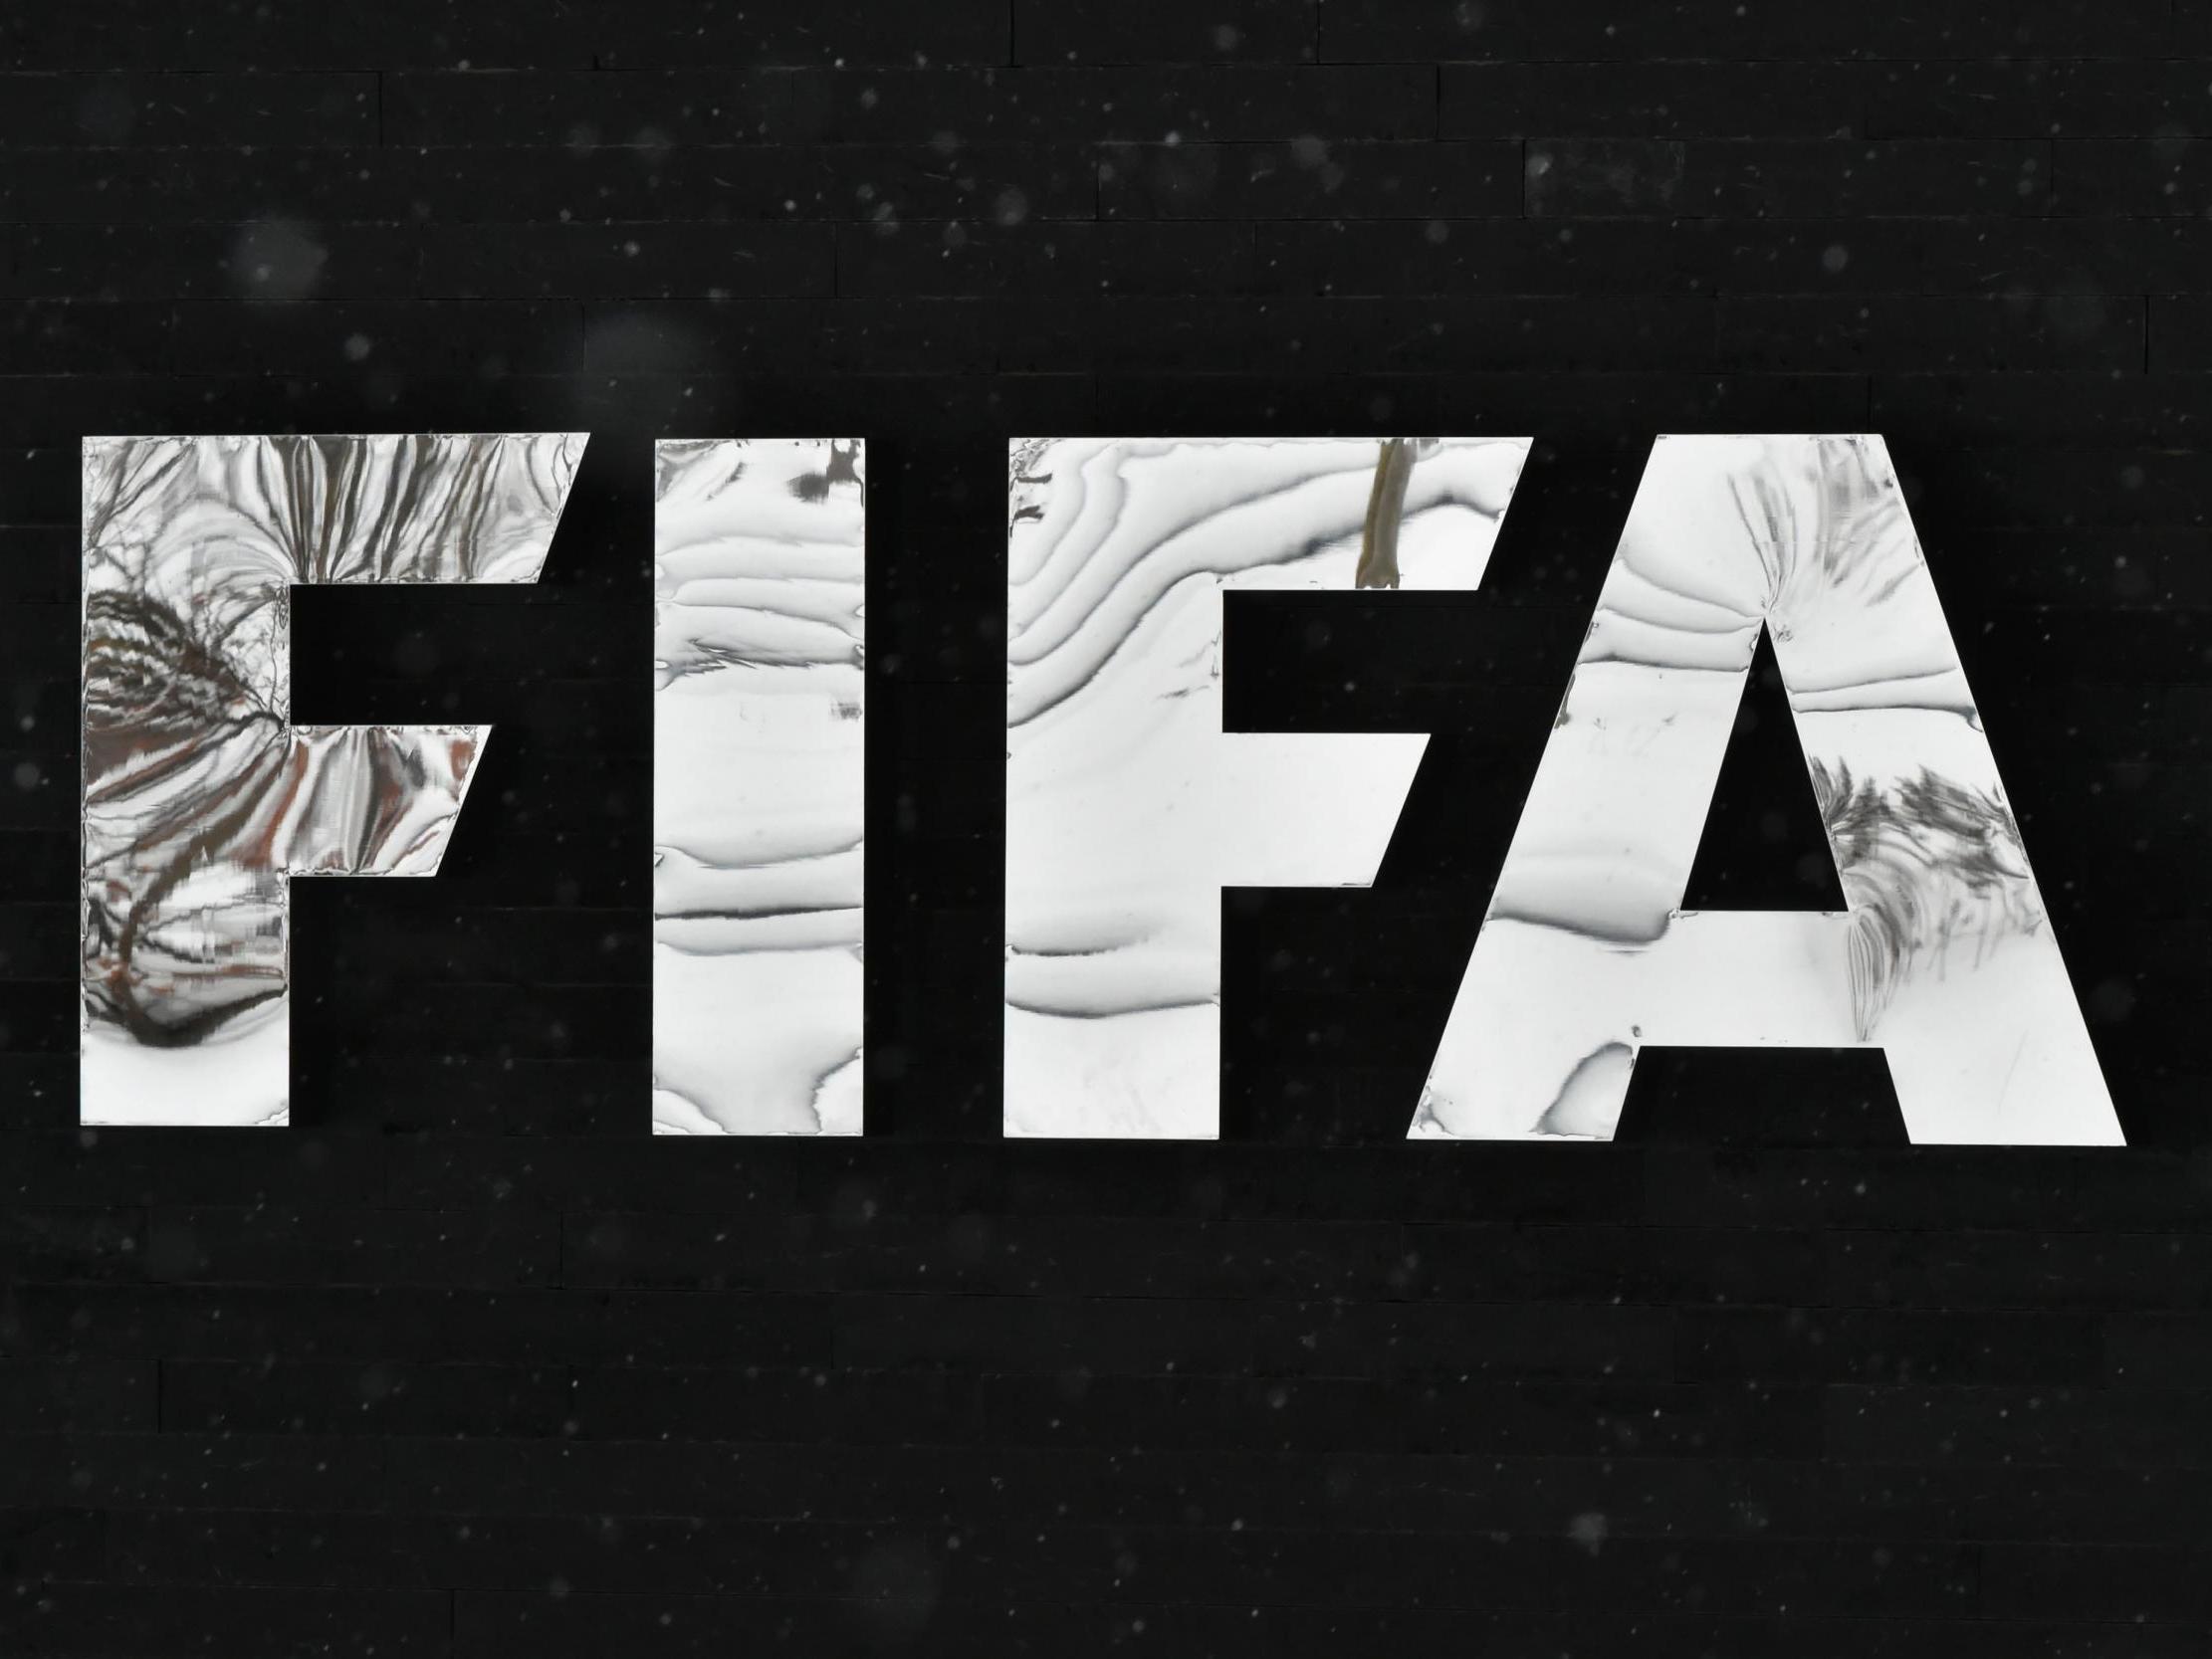 Fifa is reintroducing regulations to the football agent industry